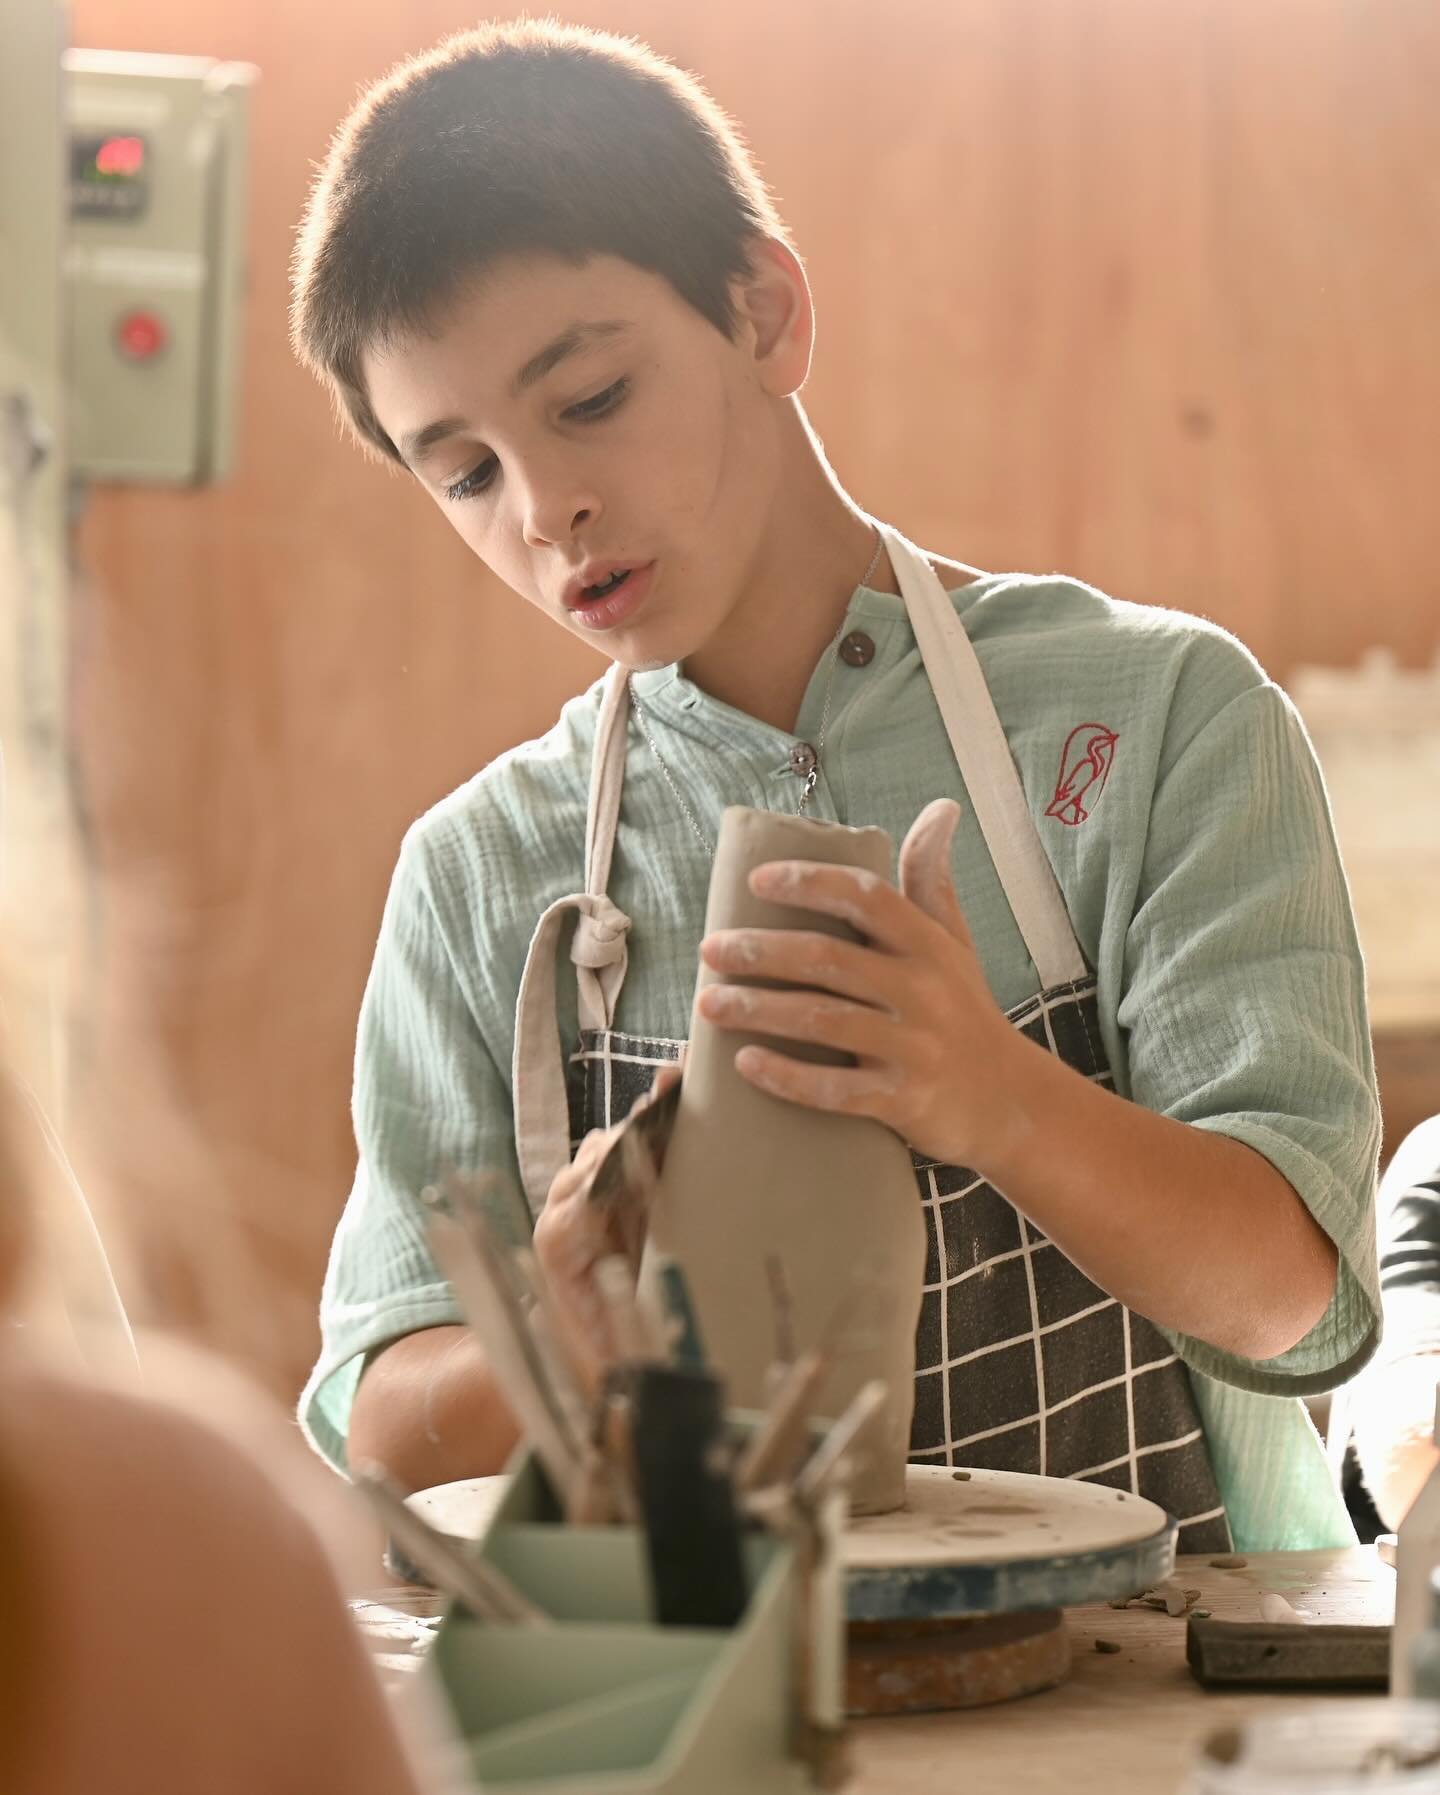 🏺✨ Creativity in Action! ✨🏺

Today&rsquo;s spotlight shines on our talented young artists in their Ceramics co-curricular class! Our budding creators are taking incredible forward strides. Swipe through to see a glimpse of the magic happening at th